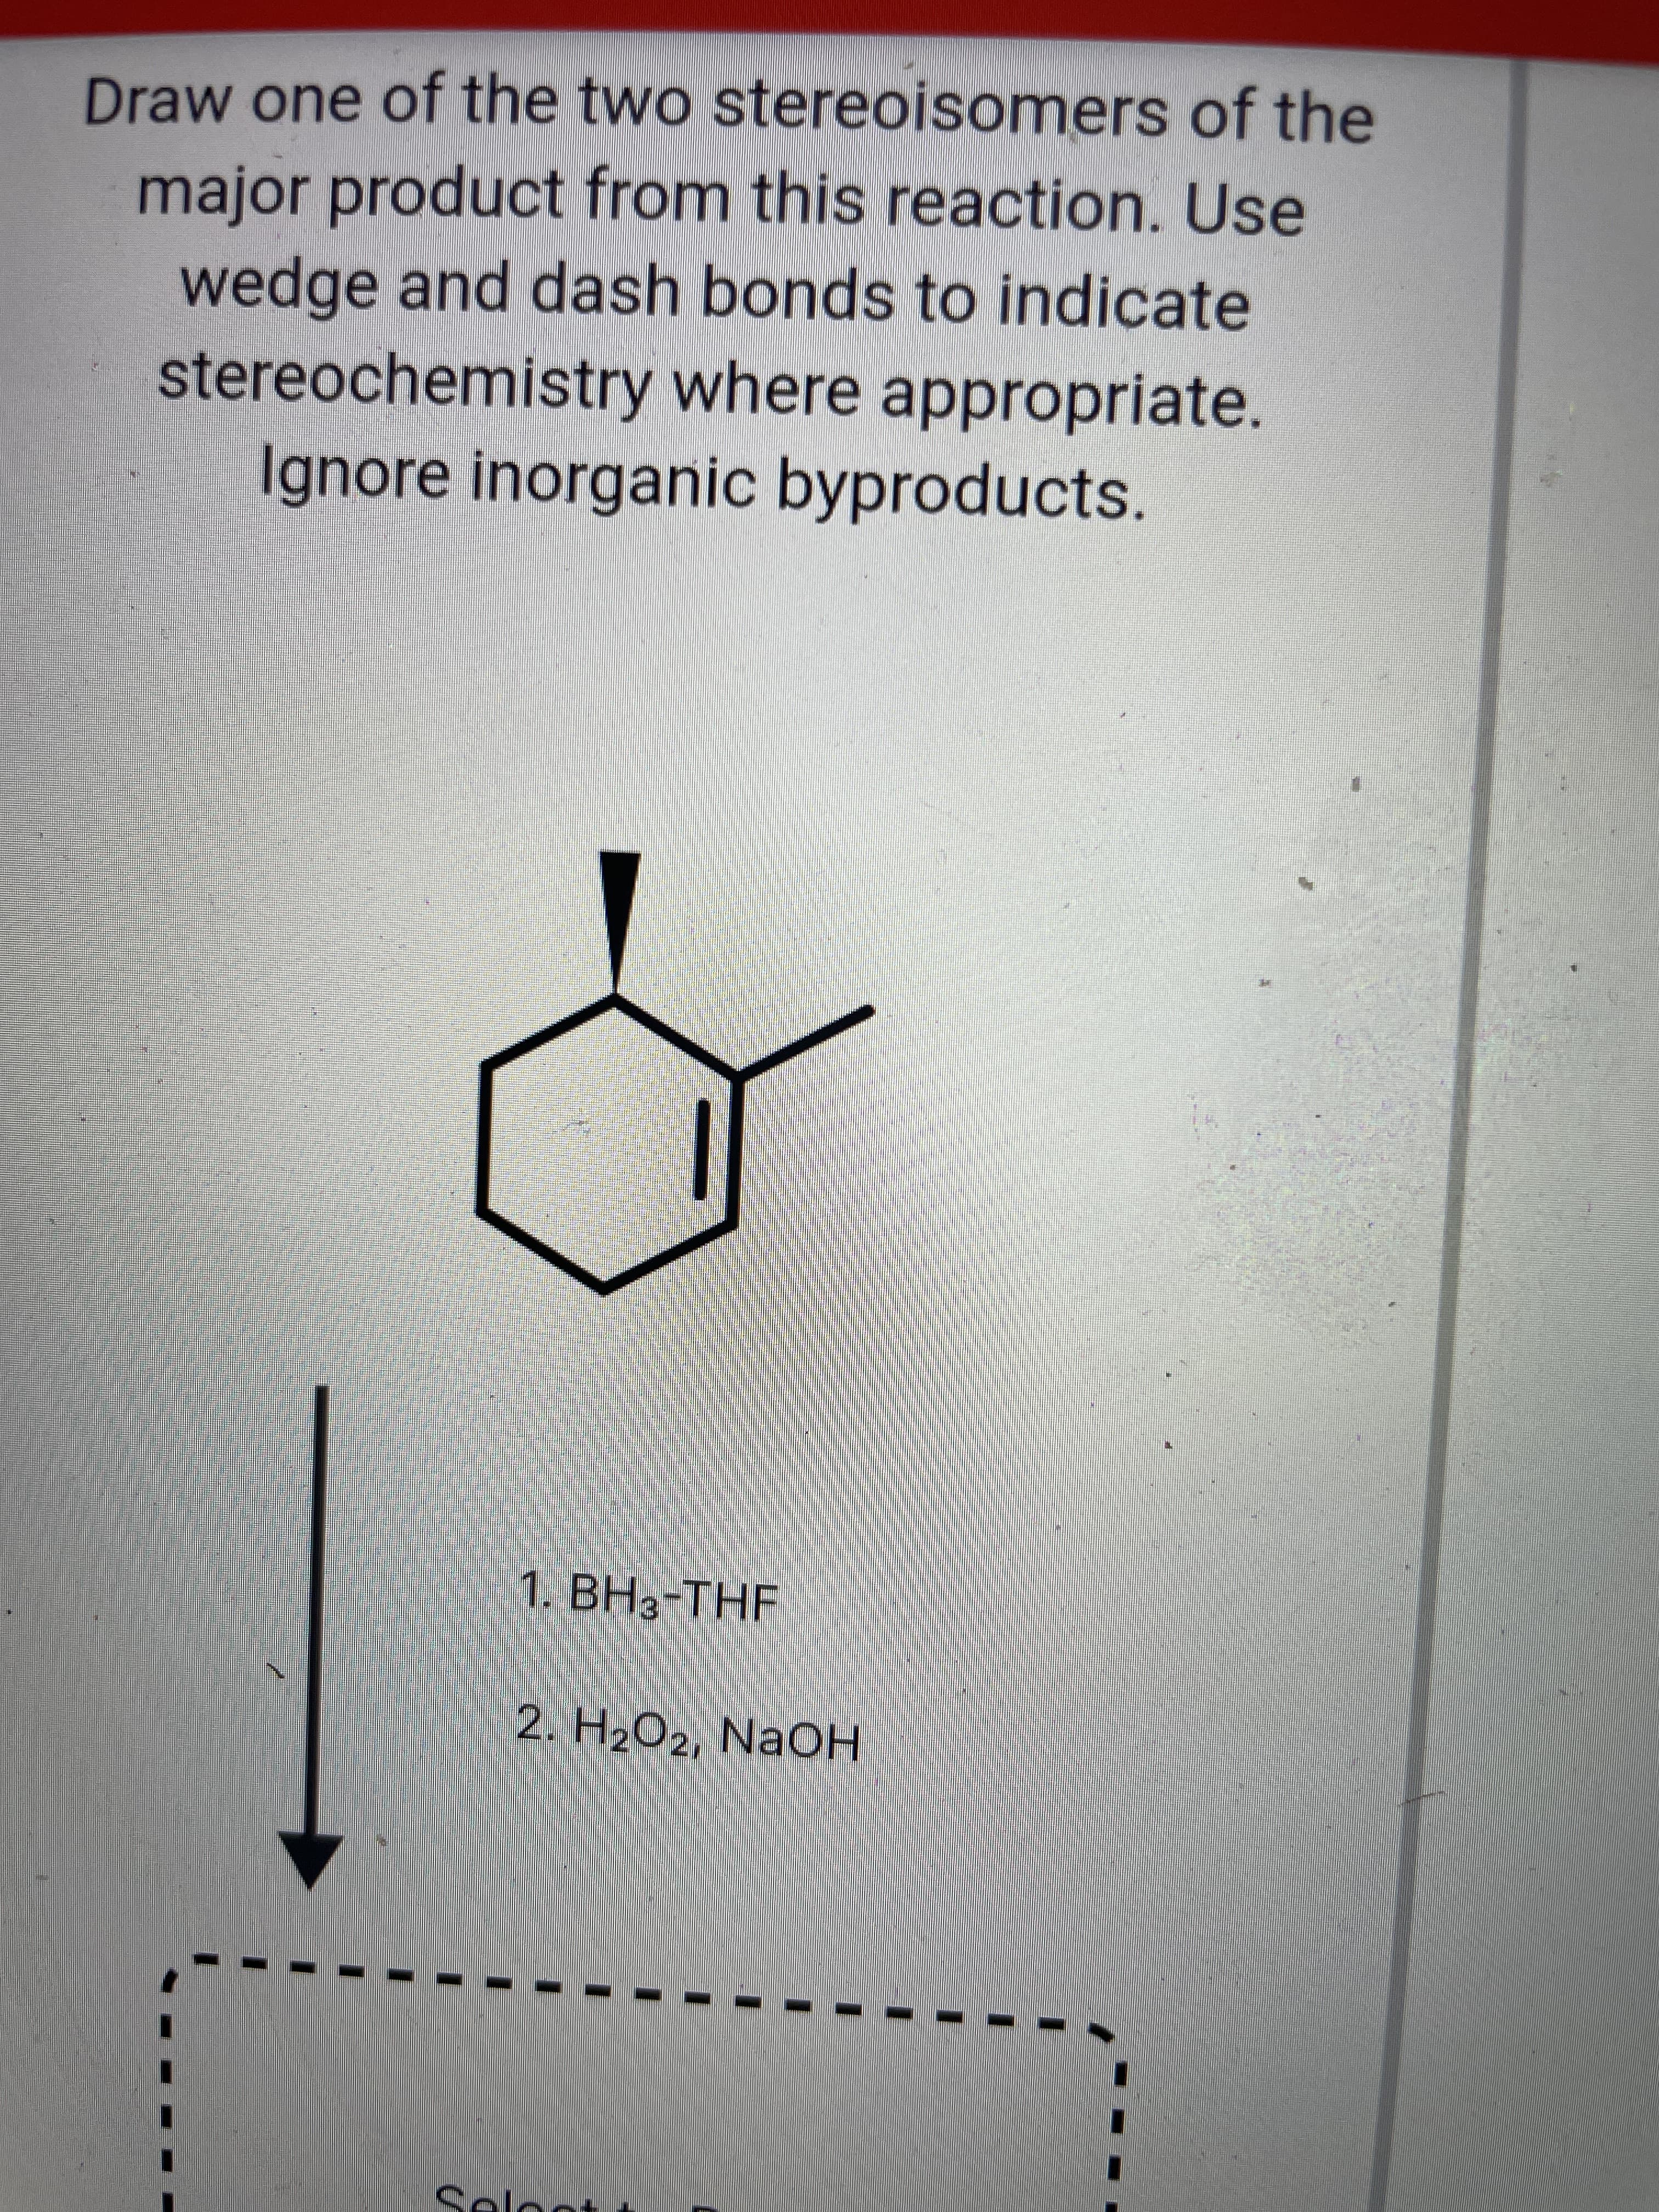 Draw one of the two stereoisomers of the
major product from this reaction. Use
wedge and dash bonds to indicate
stereochemistry where appropriate.
Ignore inorganic byproducts.
1. BH3-THF
2. H2O2, NaOH
